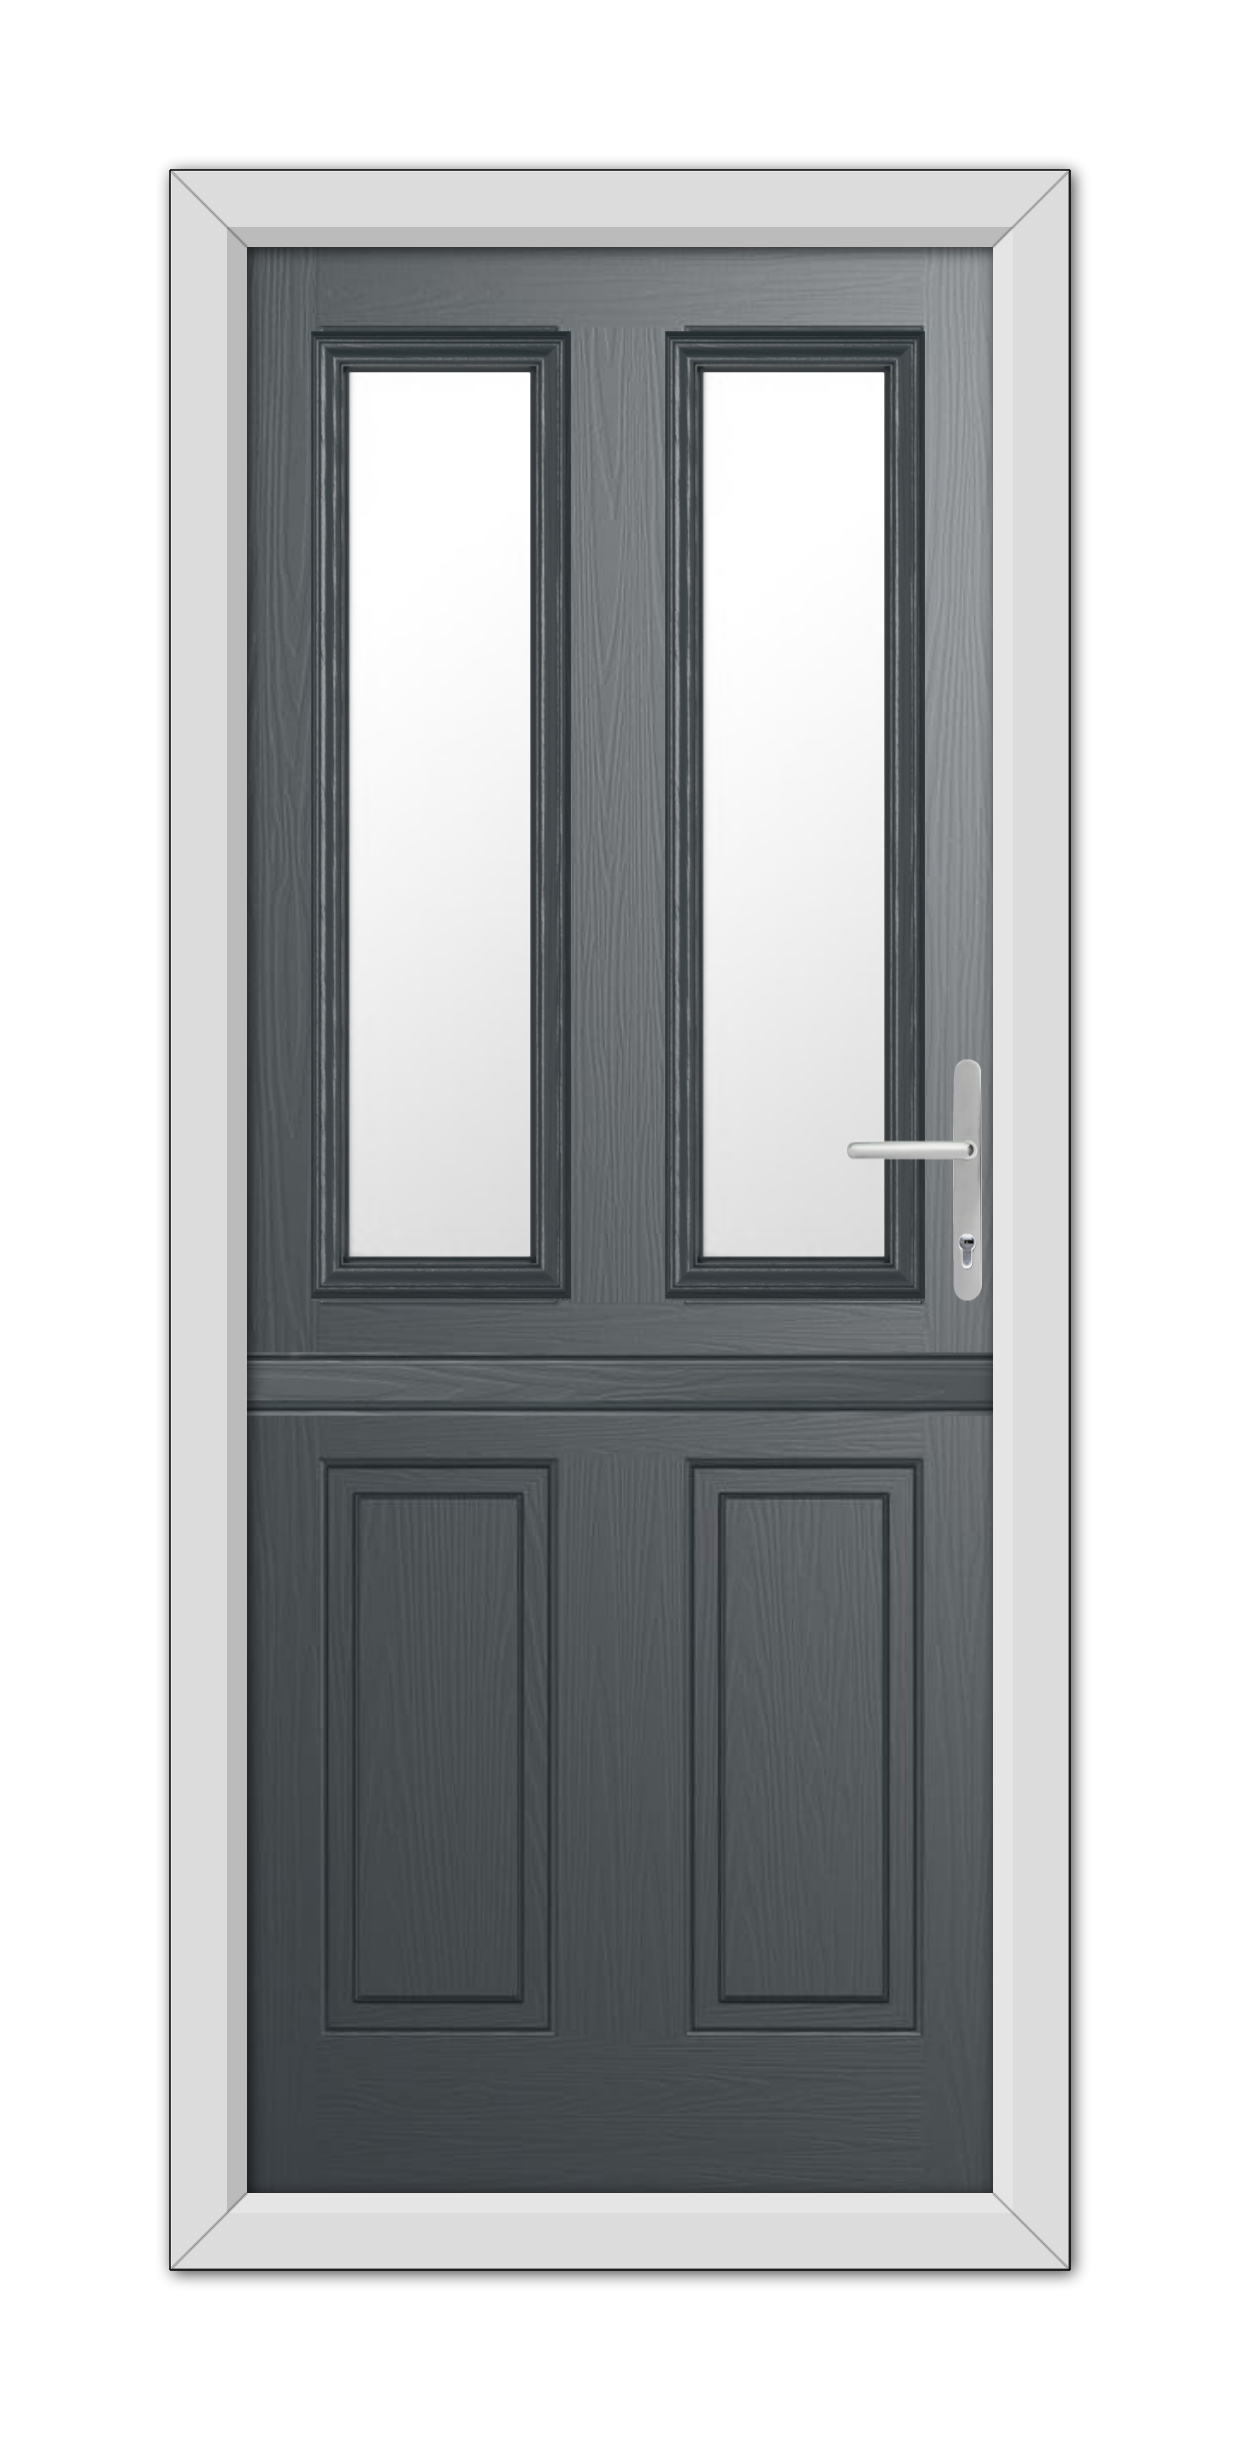 A modern Anthracite Grey Whitmore Stable Composite Door 48mm Timber Core with glass windows and a white frame, featuring a silver handle on the right.